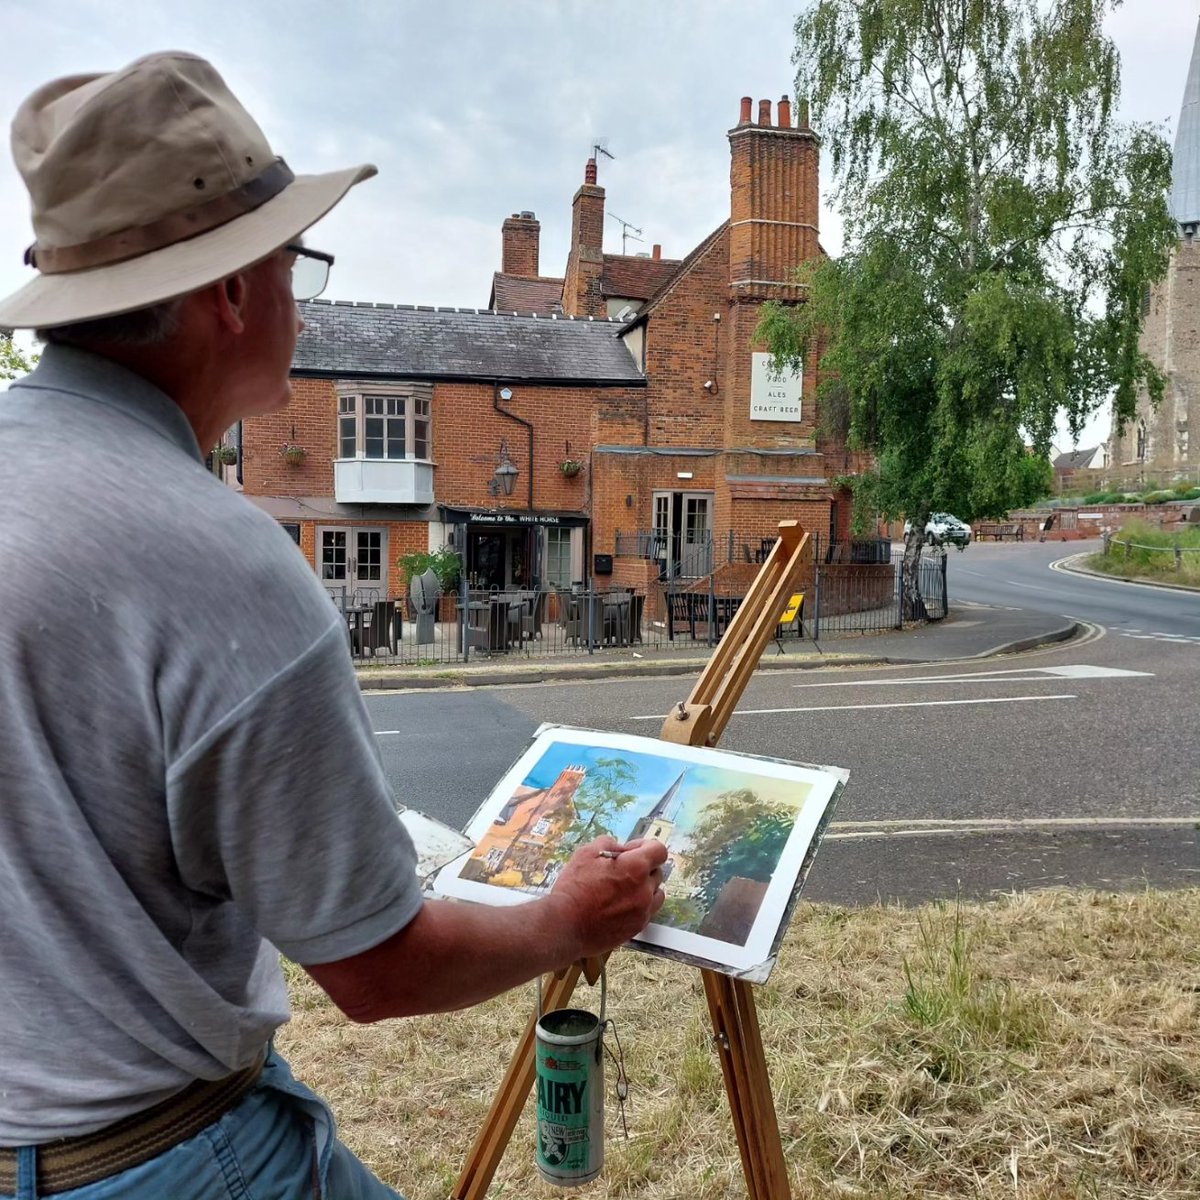 I'm painting a commission today in Great Baddow, Essex. 
Colin Steed #colinsteedart1 #steedlindy #art #essexcounty #countryfile #uktravel #pleinairpainting #ukartist